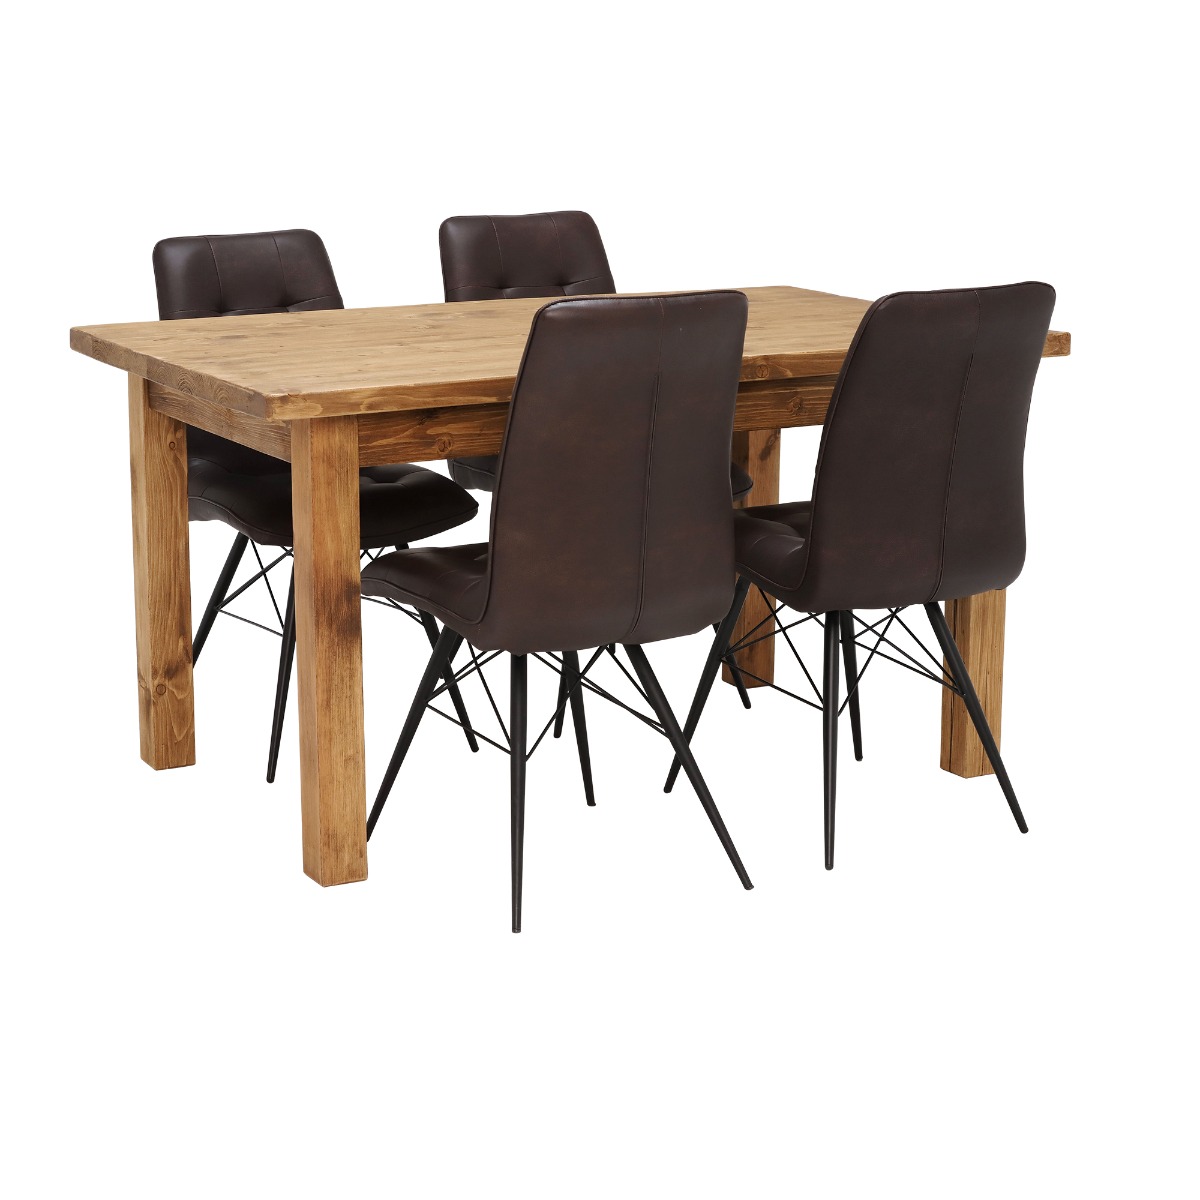 Photo of Covington dining table & 4 hix chairs in brown